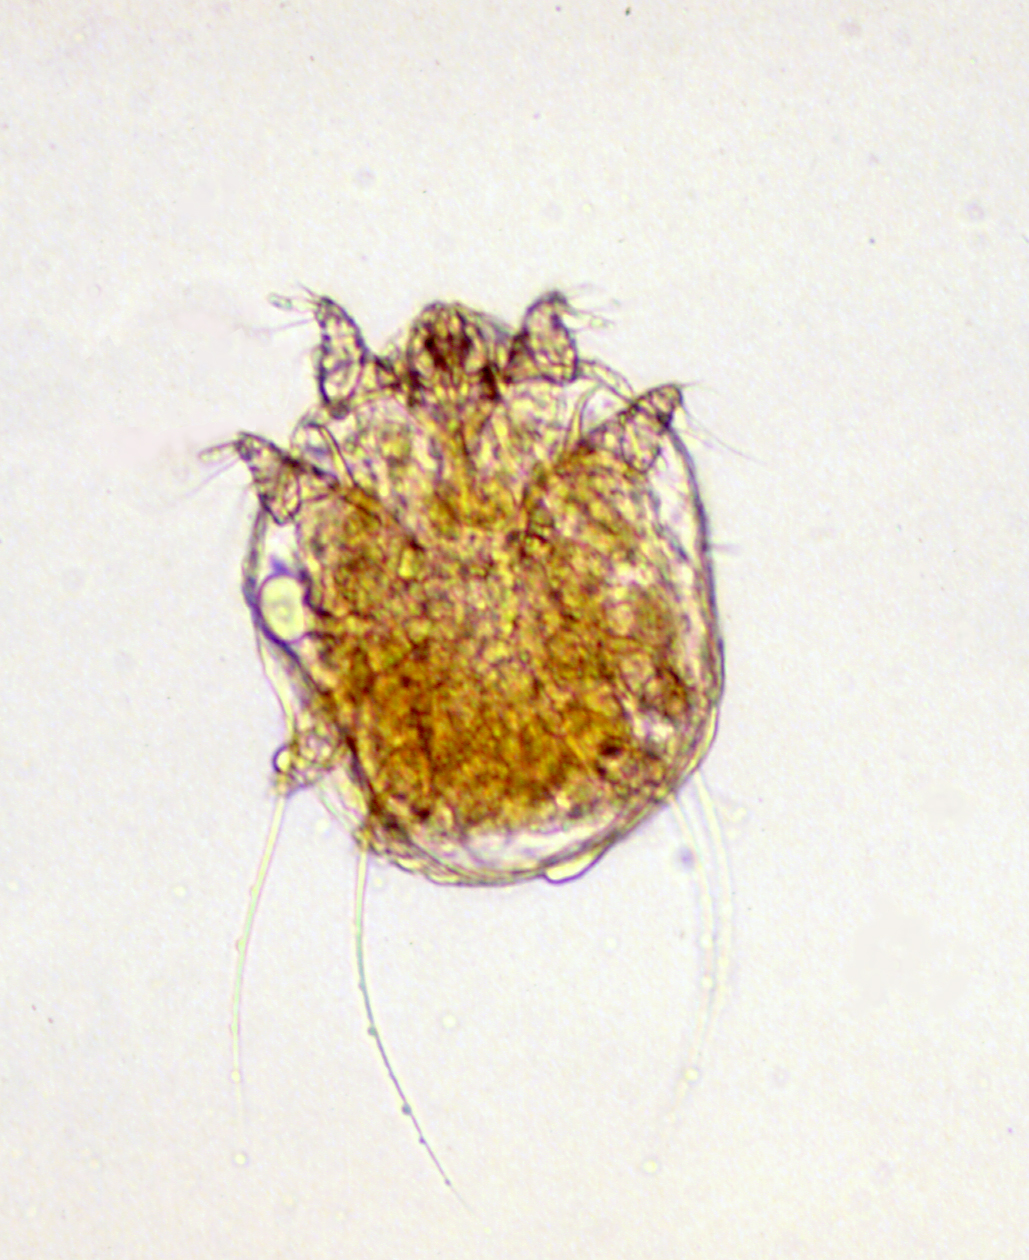 Slideshow: Pictures of scabies - WebMD Boots